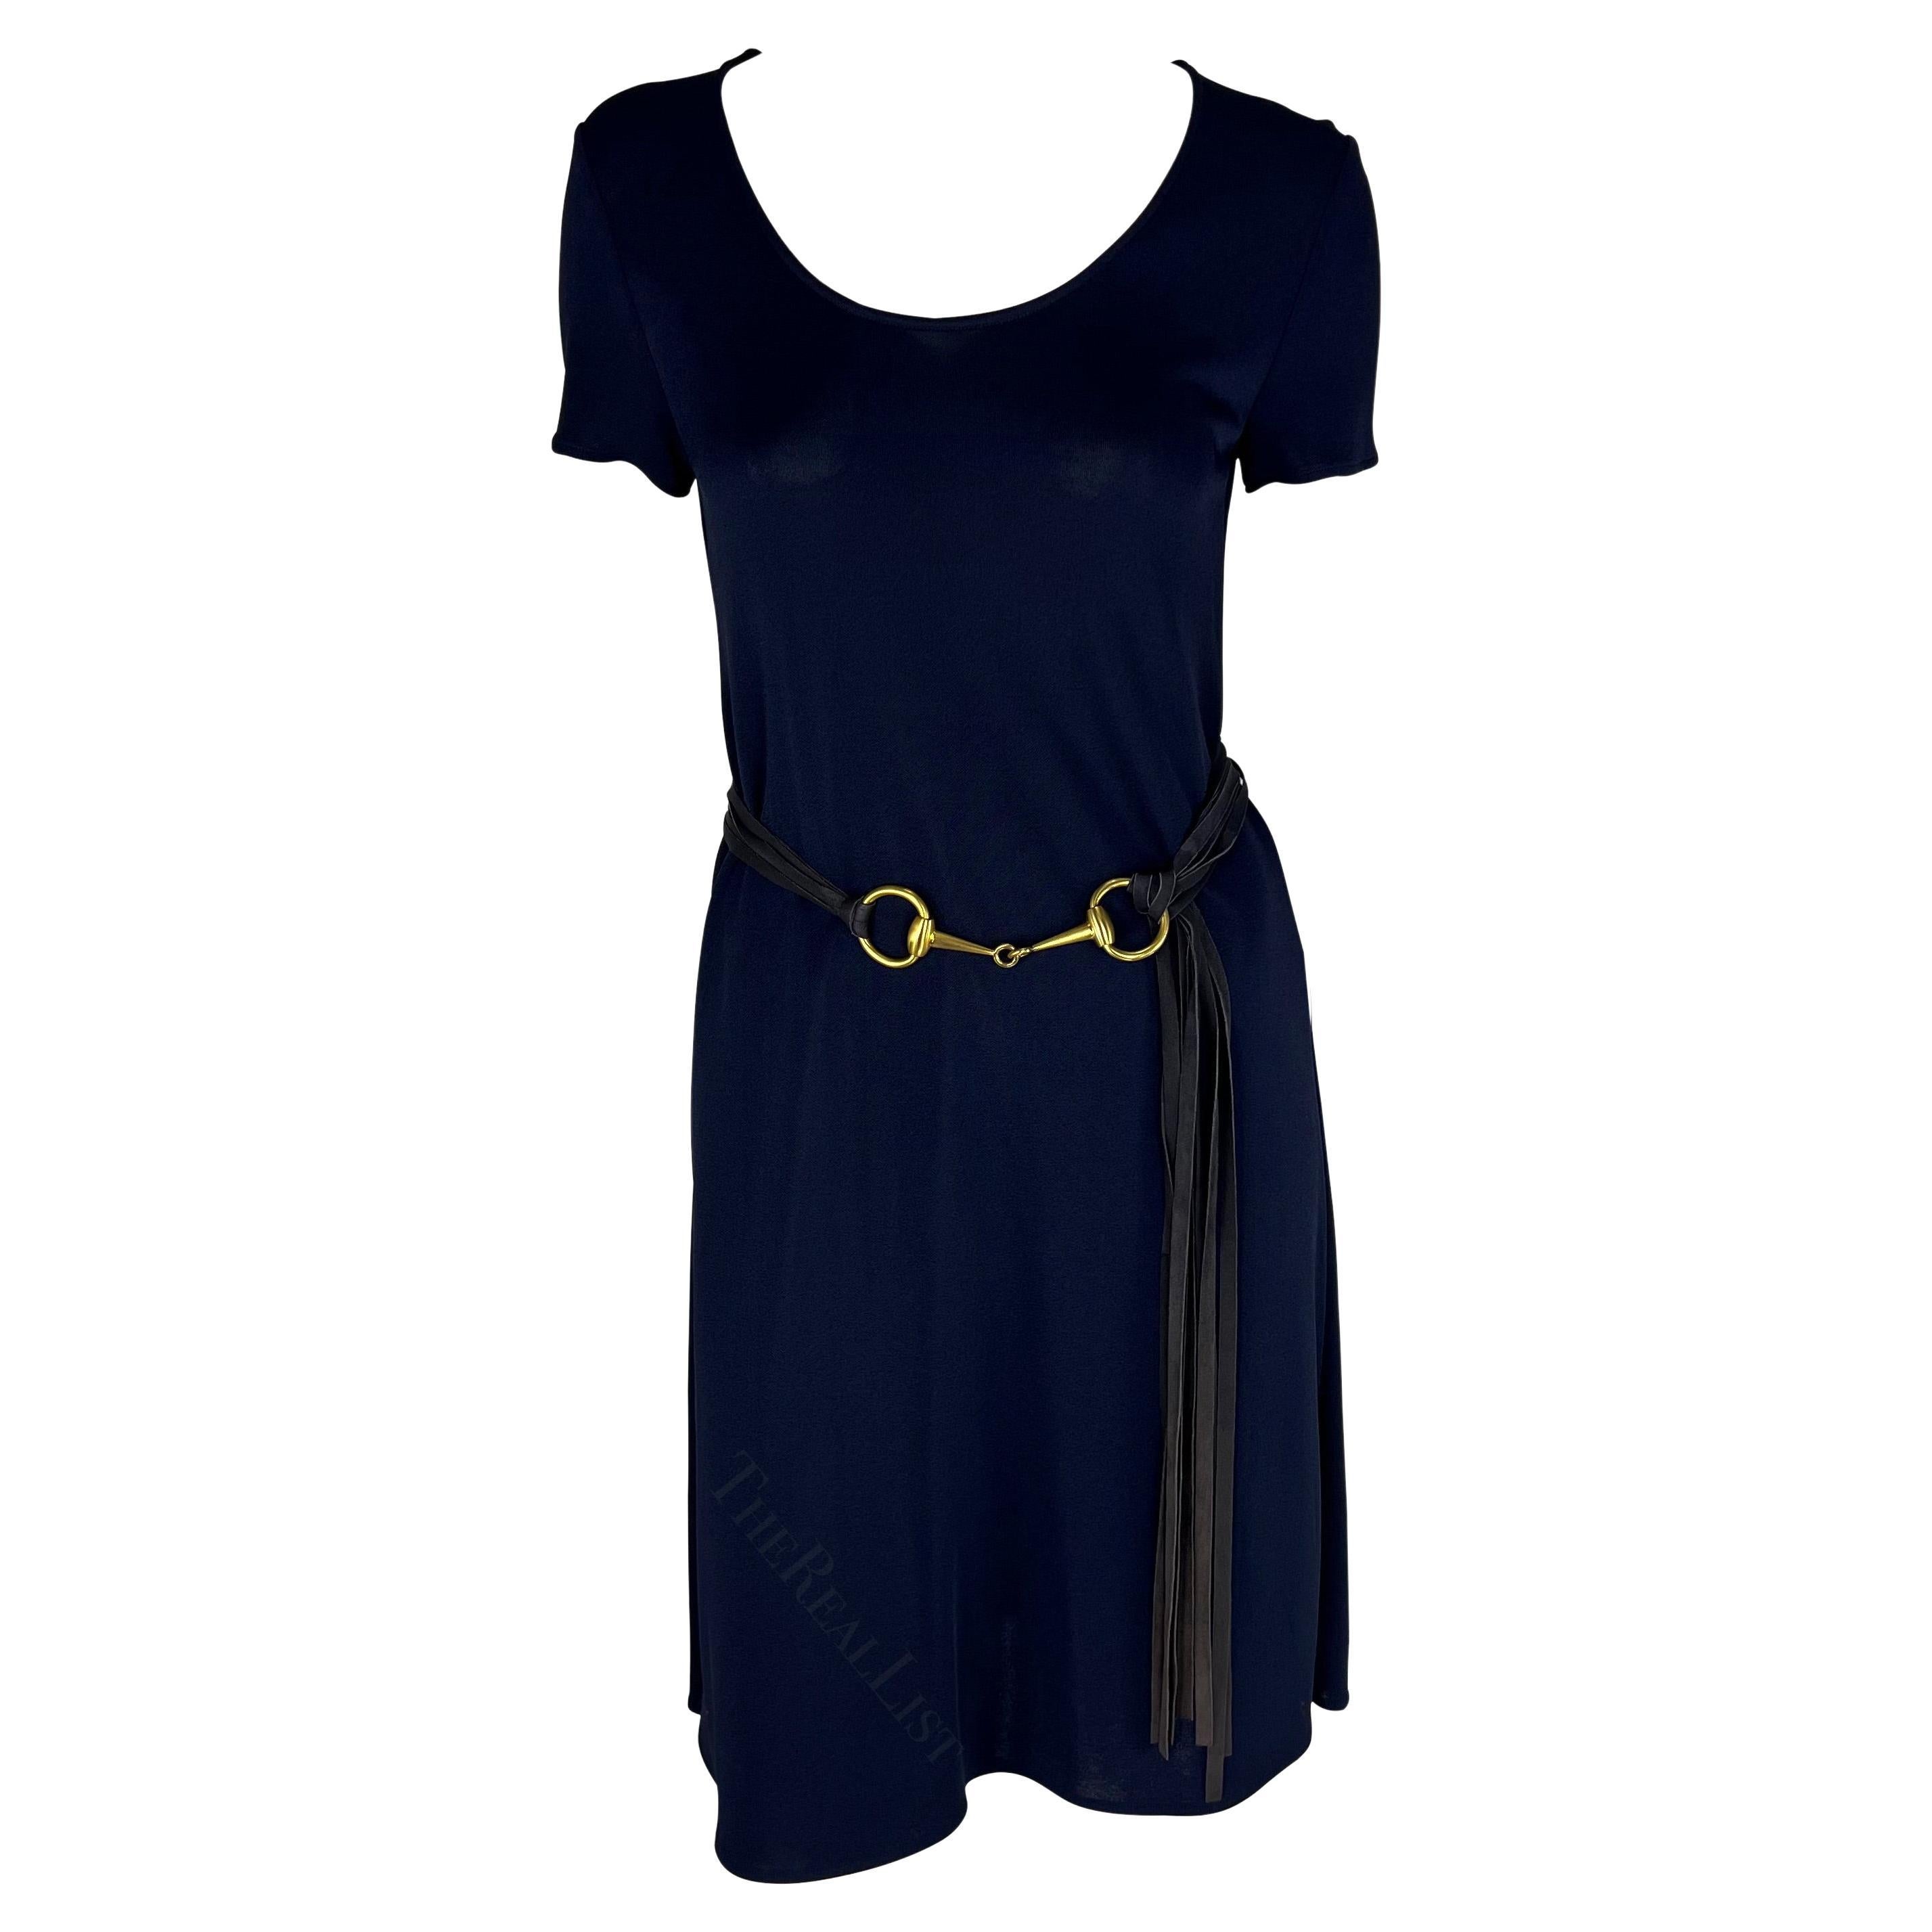 S/S 1994 Gucci Navy Semi Sheer Shift Dress with Gold Horsebit Belt For Sale